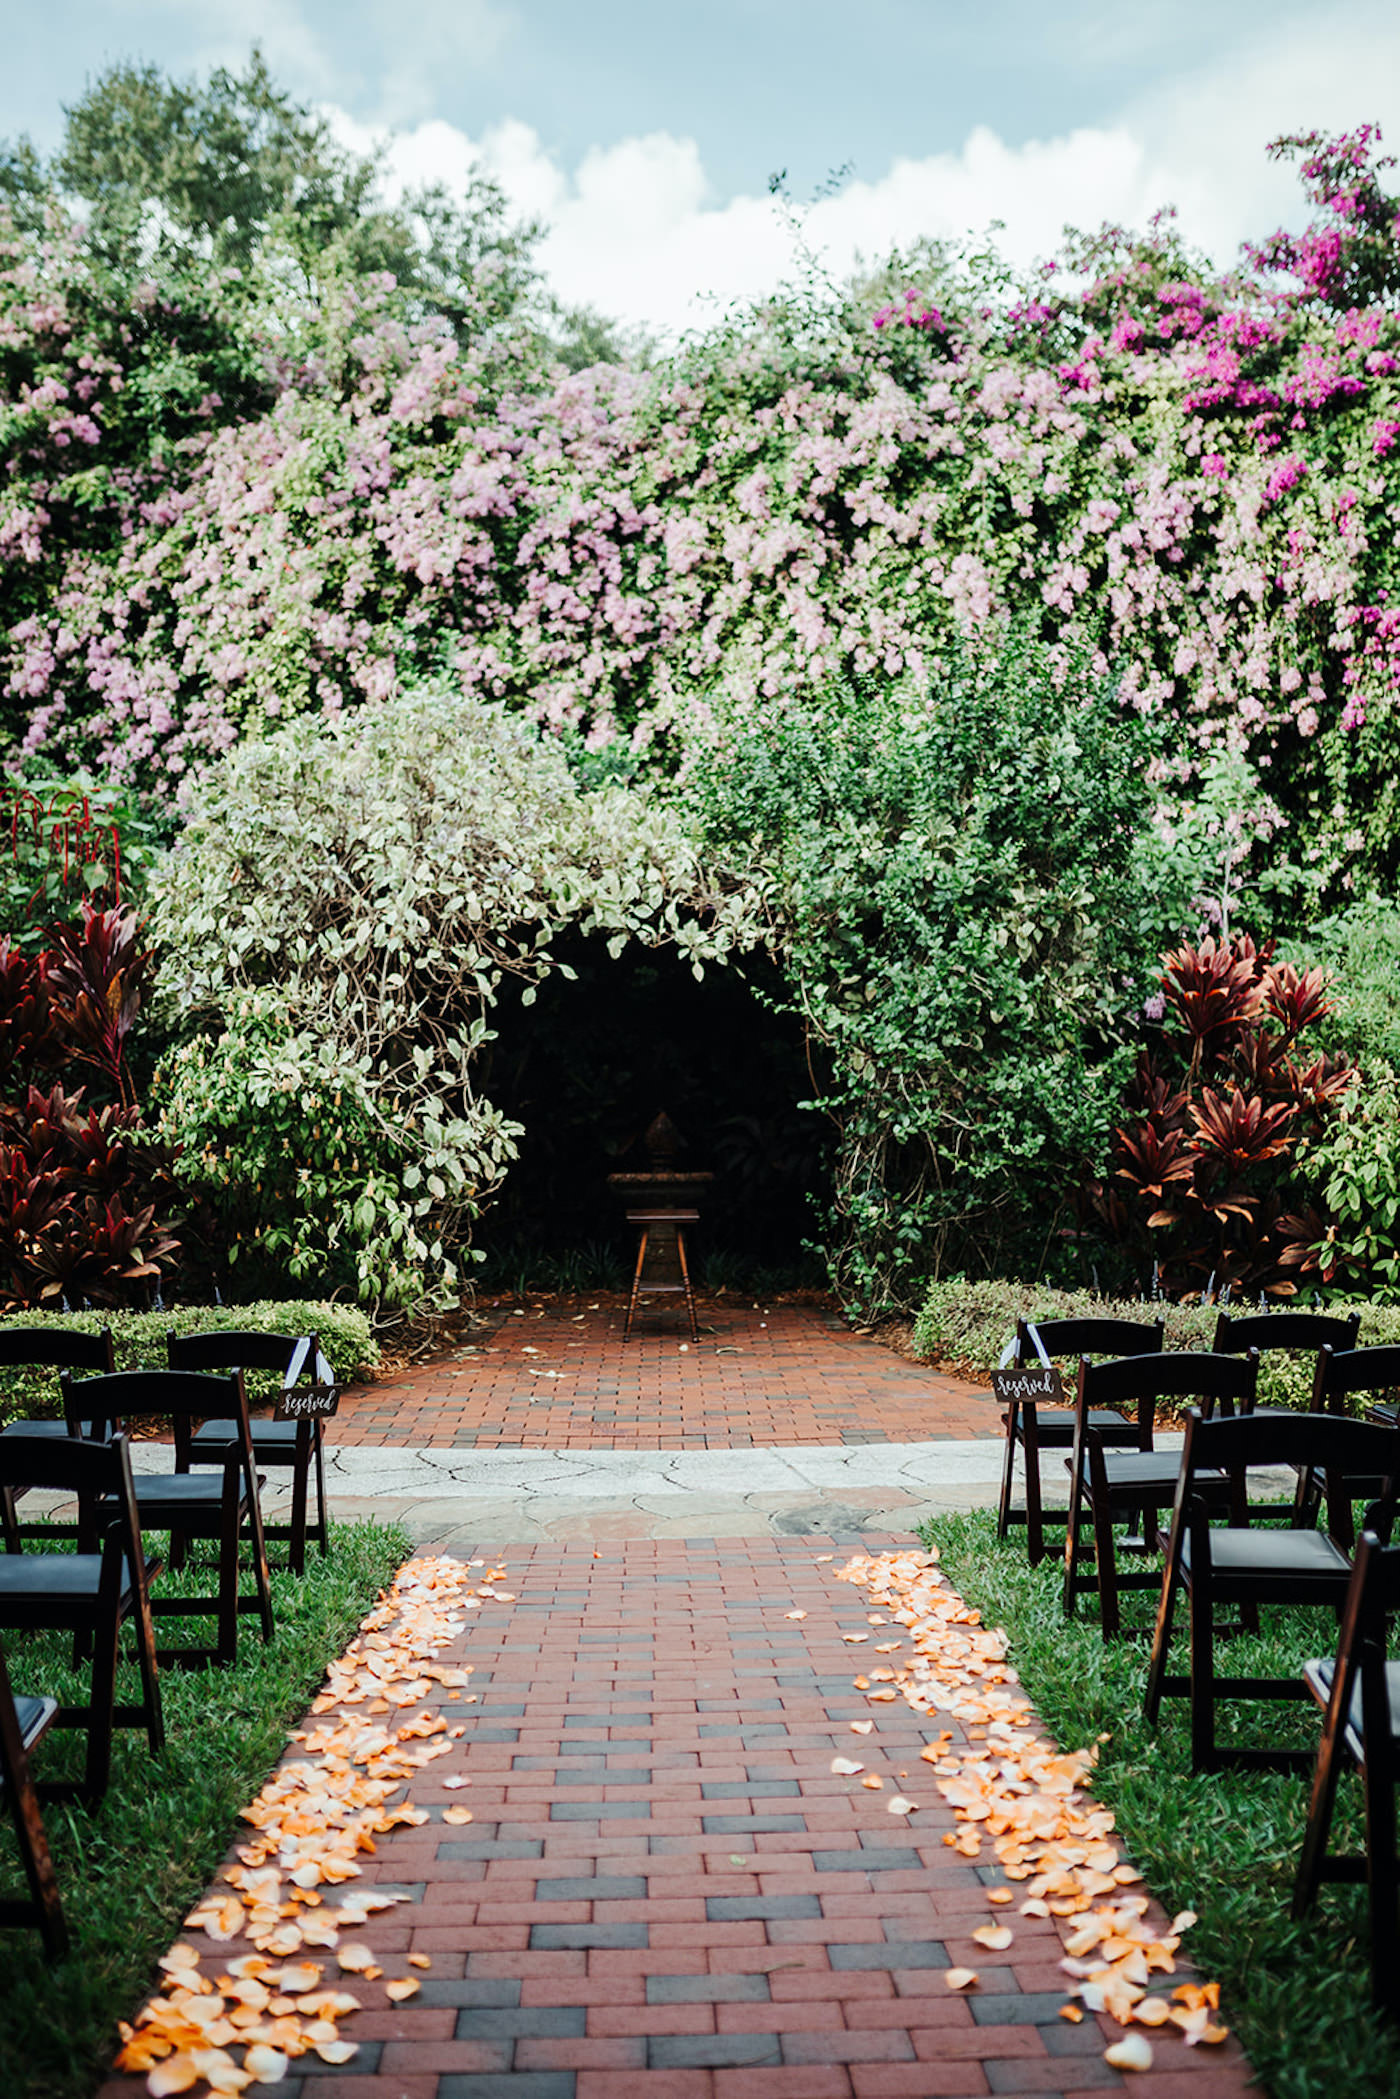 Whimsical Outdoor Wedding Ceremony Decor, Wooden Folding Chairs and Peach Rose Petals in Aisle, St. Petersburg Wedding Venue Sunken Gardens | Tampa Wedding Planner Kelly Kennedy Weddings and Events